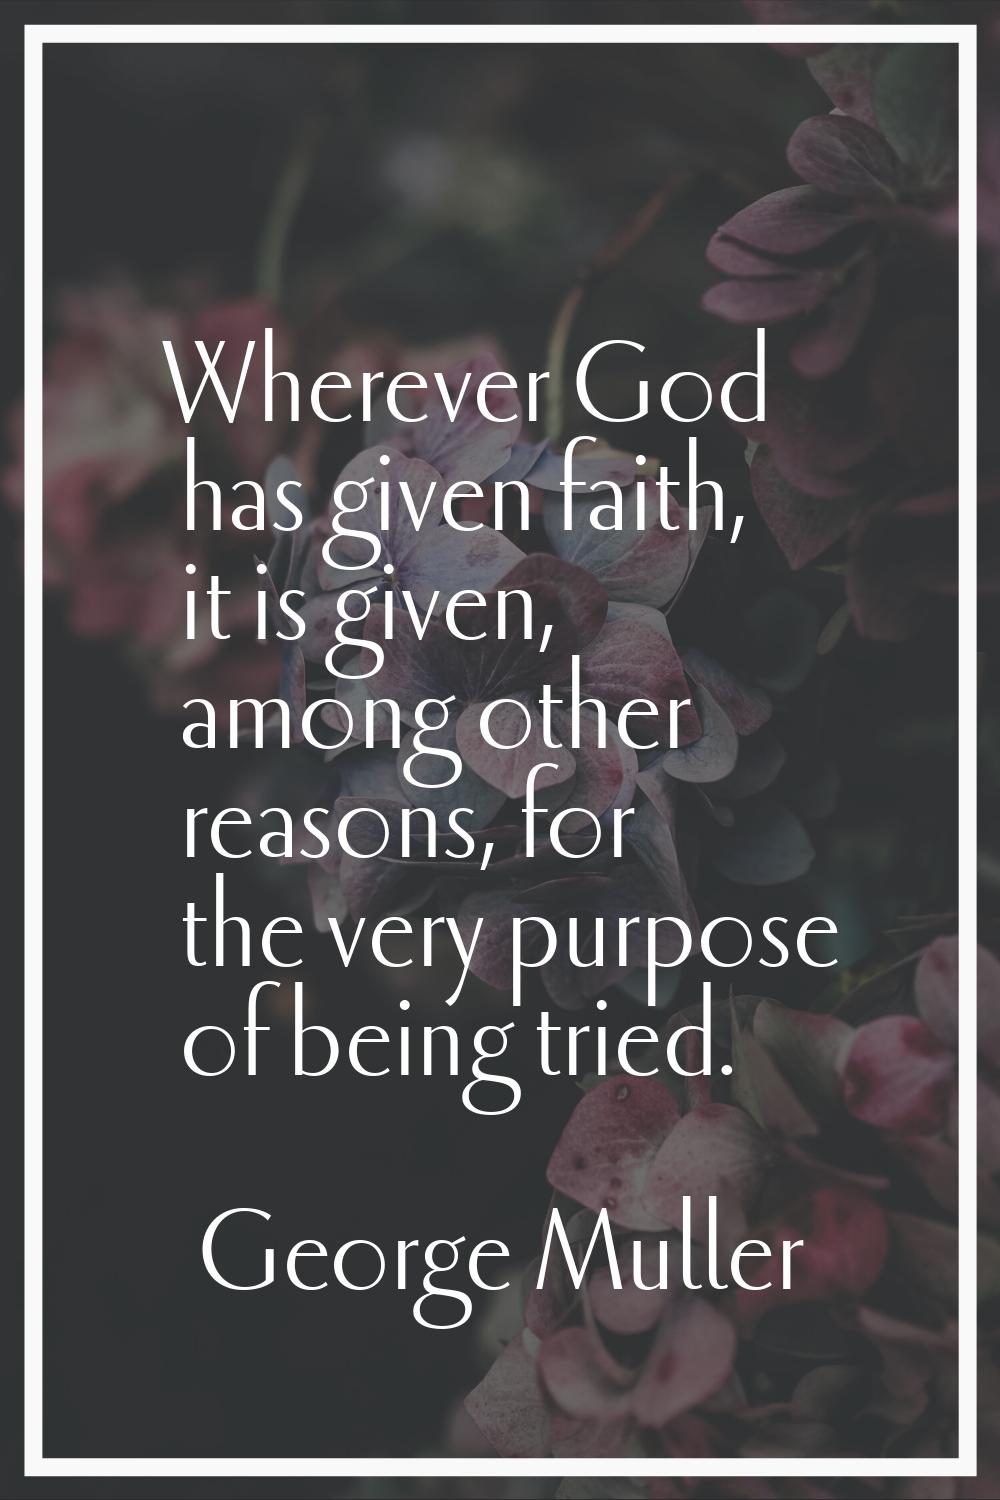 Wherever God has given faith, it is given, among other reasons, for the very purpose of being tried